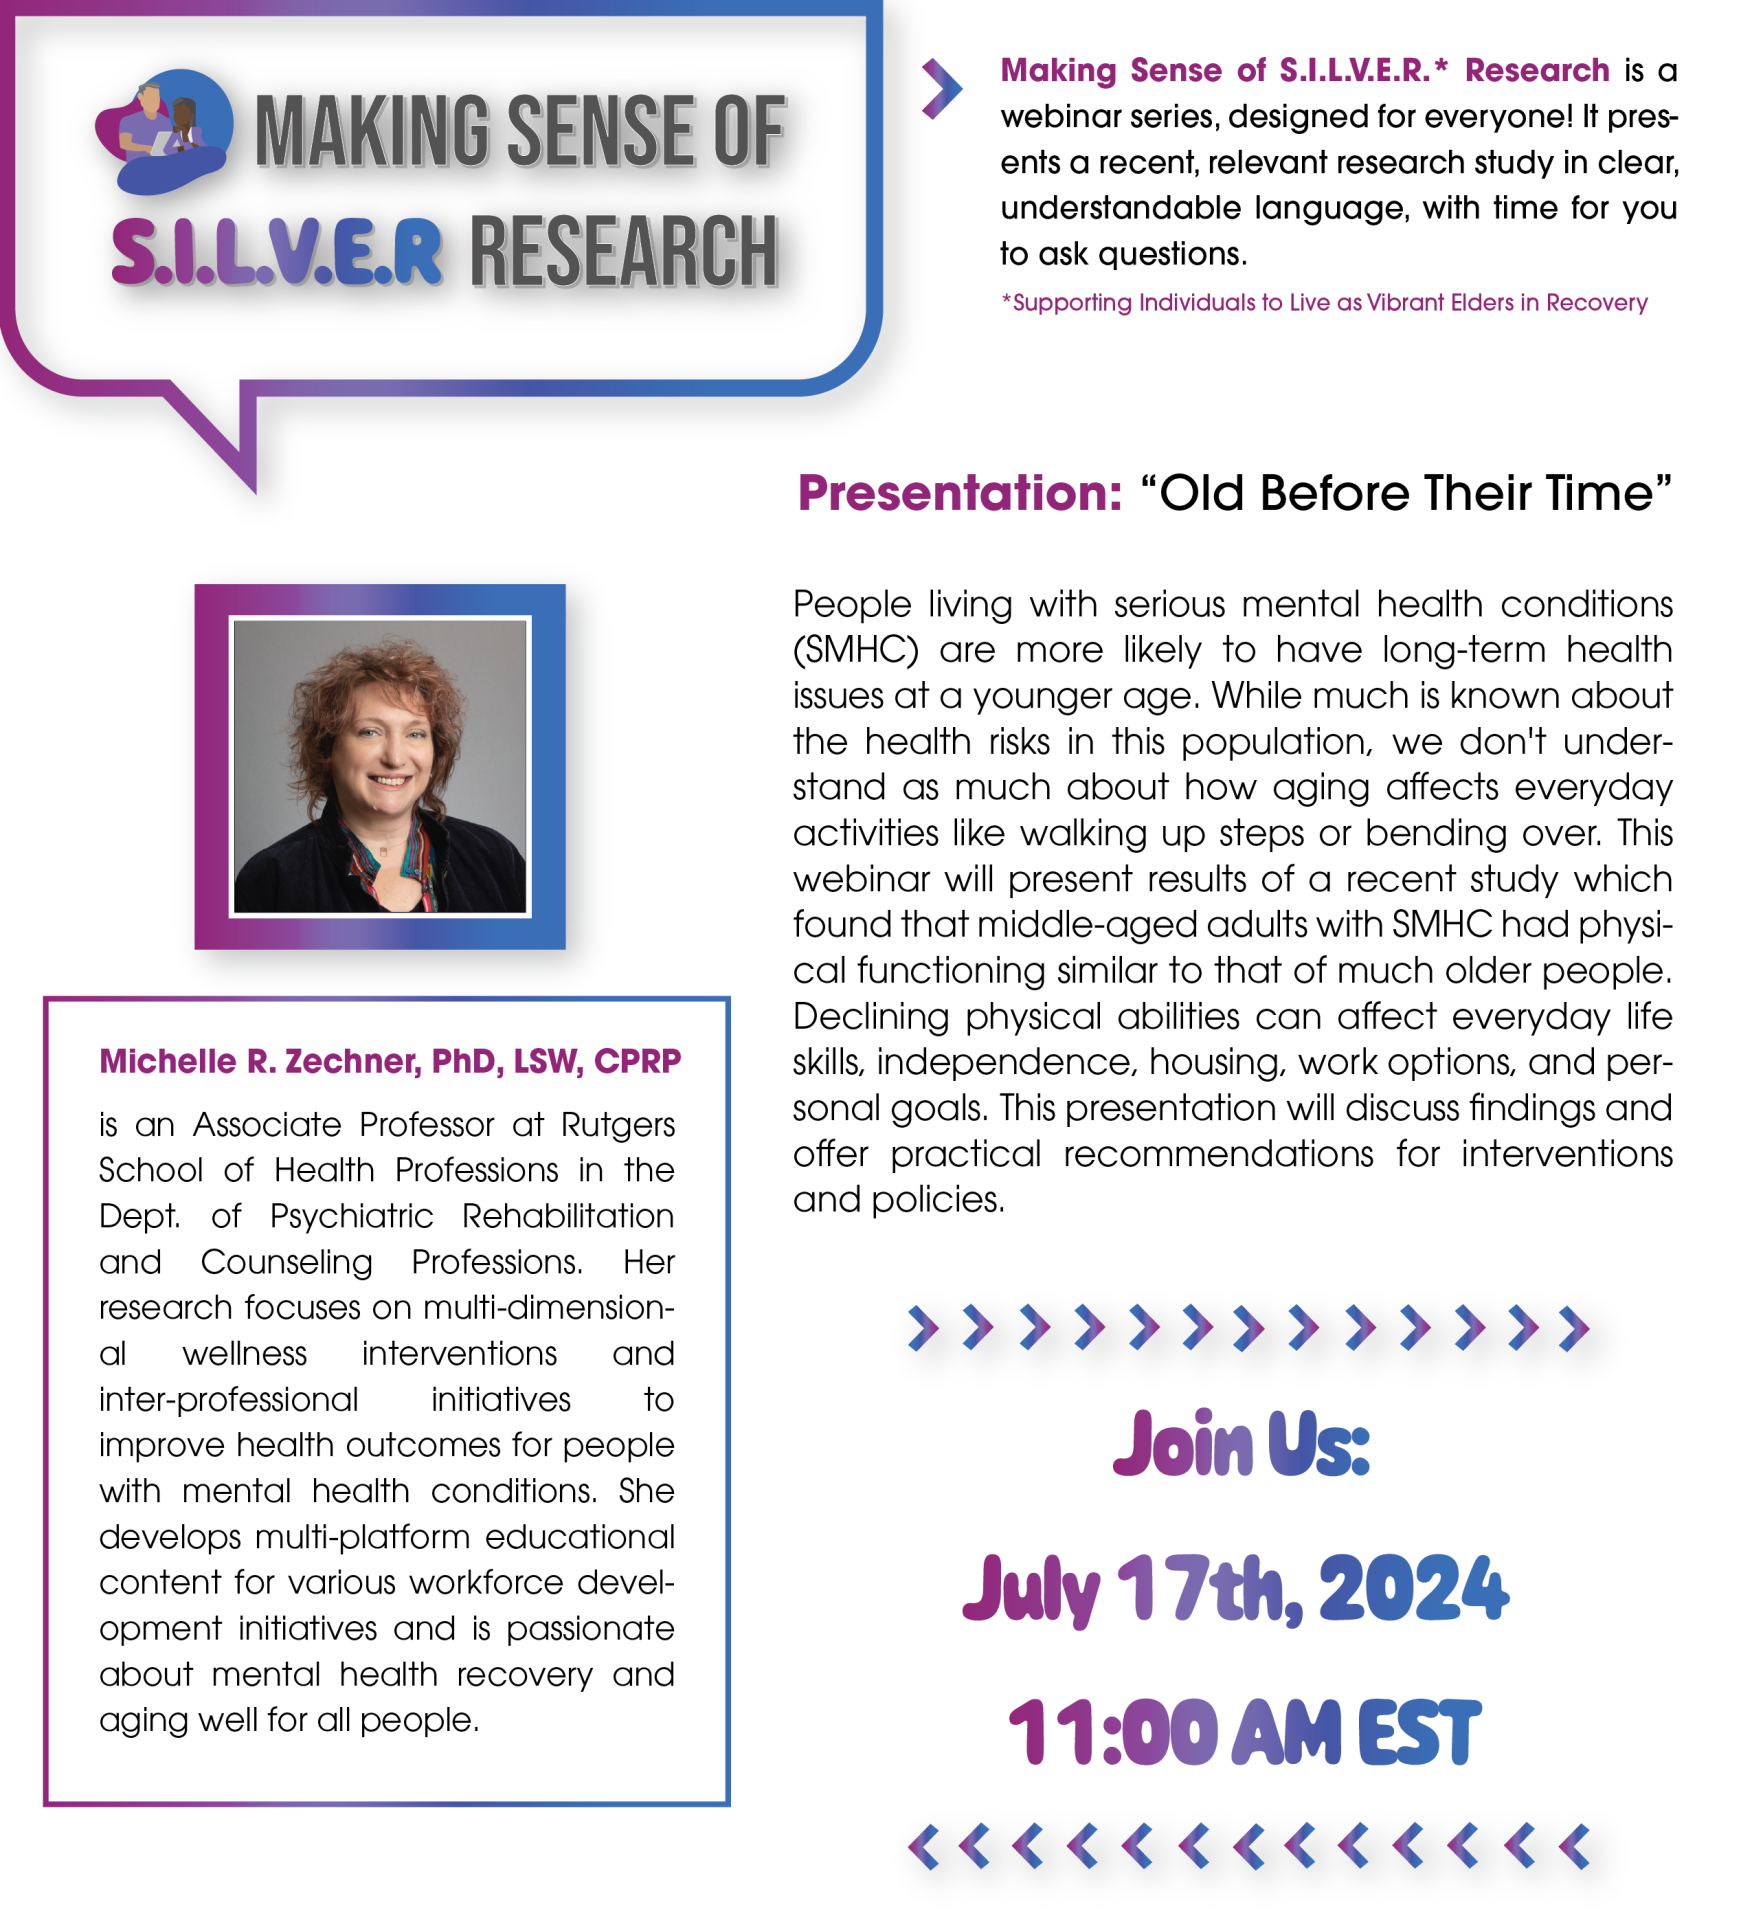 Making Sense of S.I.L.V.E.R.* Research is a webinar series, designed for everyone! It presents a recent, relevant research study in clear, understandable language, with time for you to ask questions. Presentation: “Old Before Their Time” People living with serious mental health conditions (SMHC) are more likely to have long-term health issues at a younger age. While much is known about the health risks in this population, we don't understand as much about how aging affects everyday activities like walking up steps or bending over. This webinar will present results of a recent study which found that middle-aged adults with SMHC had physical functioning similar to that of much older people. Declining physical abilities can affect everyday life skills, independence, housing, work options, and personal goals. This presentation will discuss findings and offer practical recommendations for interventions and policies. Michelle R. Zechner, PhD, LSW, CPRP is an Associate Professor at Rutgers School of Health Professions in the Dept. of Psychiatric Rehabilitation and Counseling Professions. Her research focuses on multi-dimensional wellness interventions and inter-professional initiatives to improve health outcomes for people with mental health conditions. She develops multi-platform educational content for various workforce development initiatives and is passionate about mental health recovery and aging well for all people. This event is supported by funding from the National Institute on Disability, Independent Living, and Rehabilitation Research. NIDILRR is a Center within the Administration for Community Living (ACL), Department of Health and Human Services (HHS). The contents of this project do not necessarily represent the policy of NIDILRR, ACL, HHS, and you should not assume endorsement by the Federal Government. *Supporting Individuals to Live as Vibrant Elders in Recovery Registration Link: https://bostonu.zoom.us/webinar/register/WN_2migh4DnRYy_6iXupZZ5-A#/registration